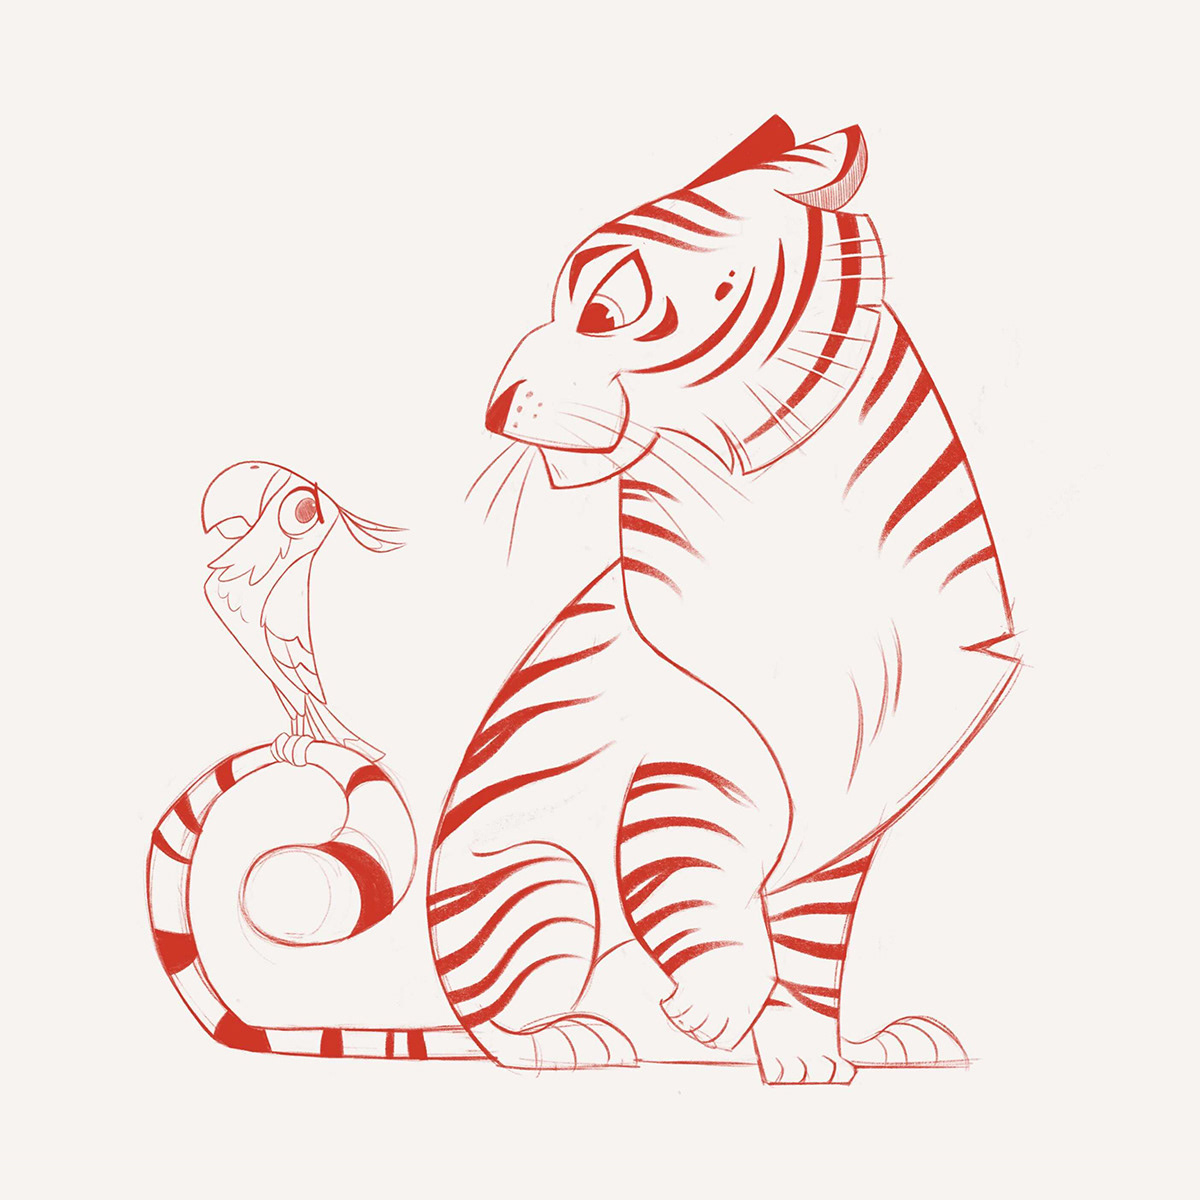 Character designs - Tiger & parrot on Behance